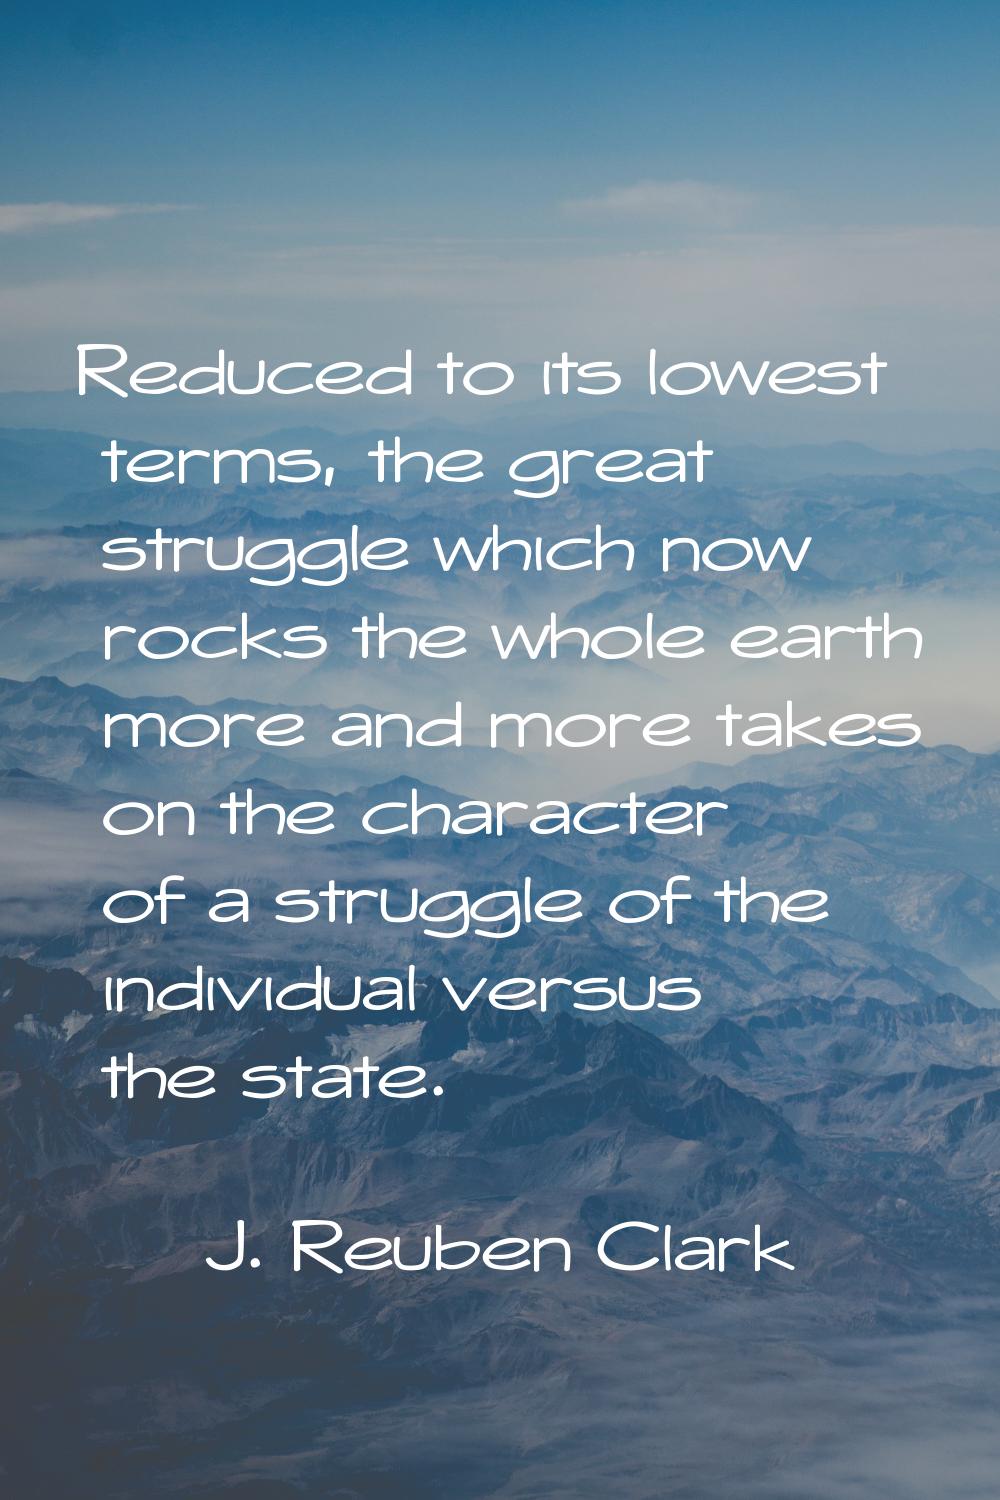 Reduced to its lowest terms, the great struggle which now rocks the whole earth more and more takes